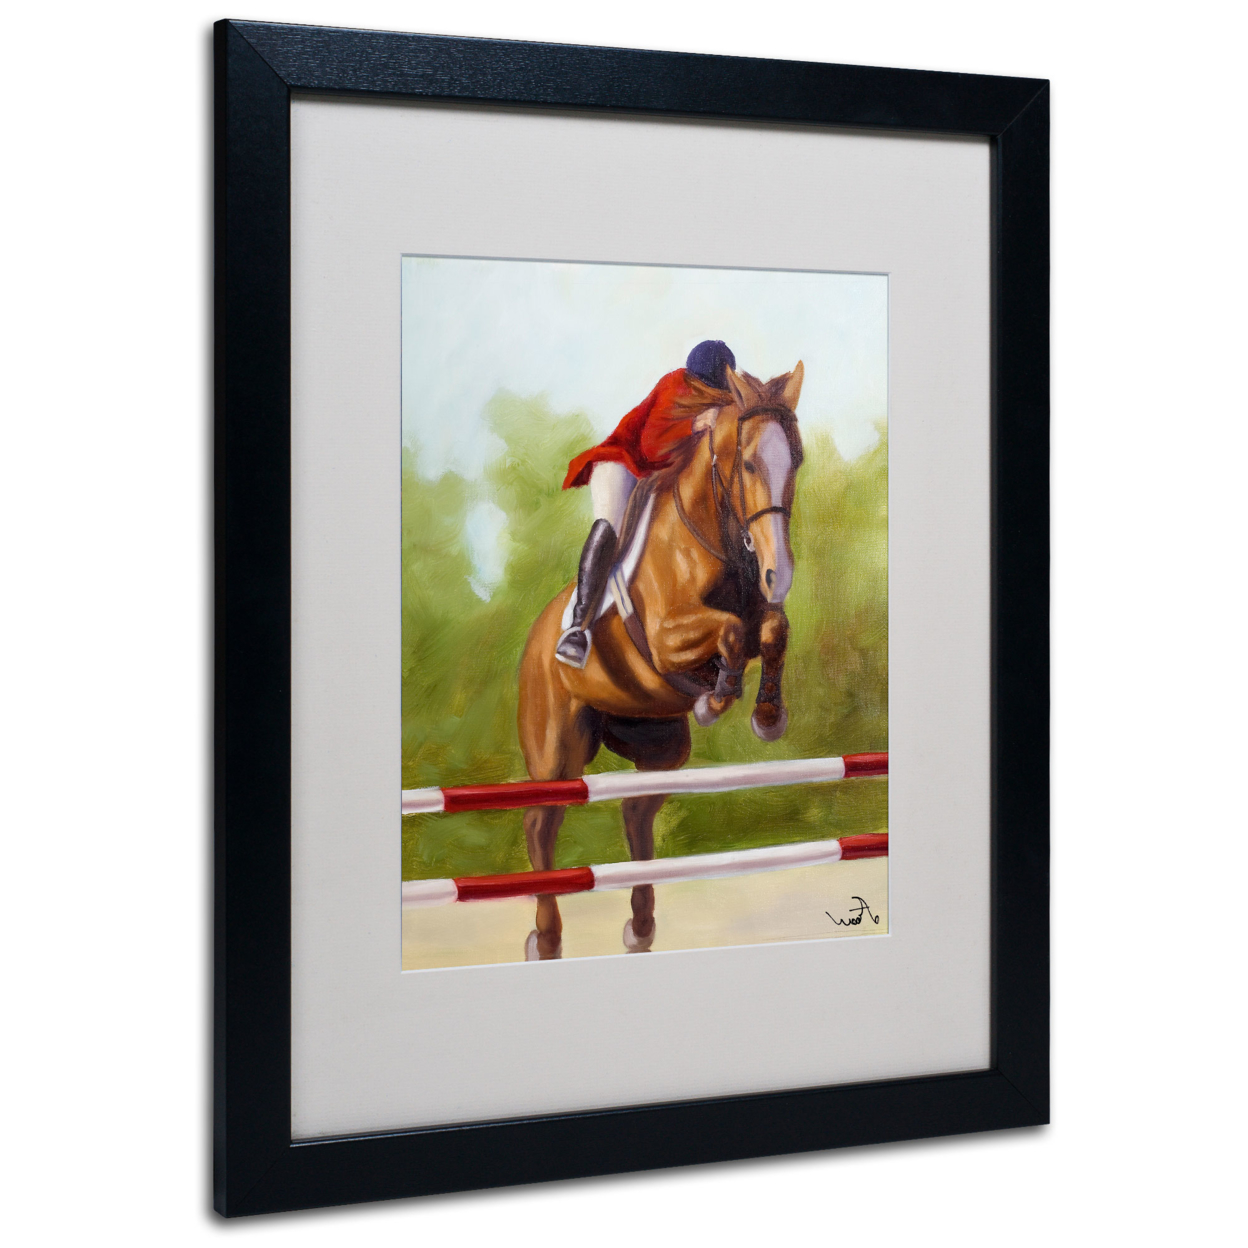 Michelle Moate 'Horse Of Sport III' Black Wooden Framed Art 18 X 22 Inches